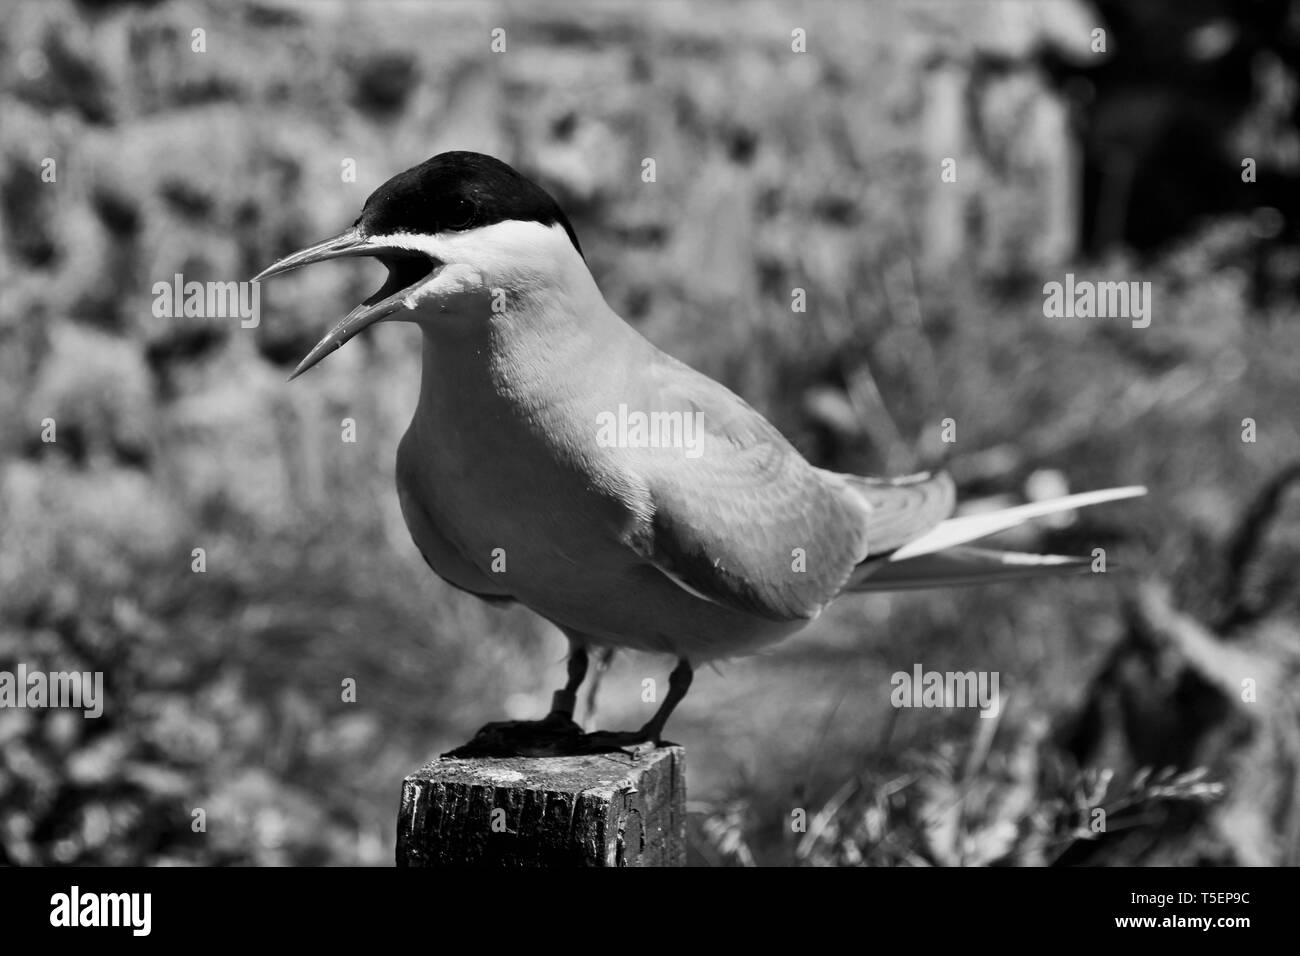 A picture of an Arctic Tern in Monochrome Stock Photo